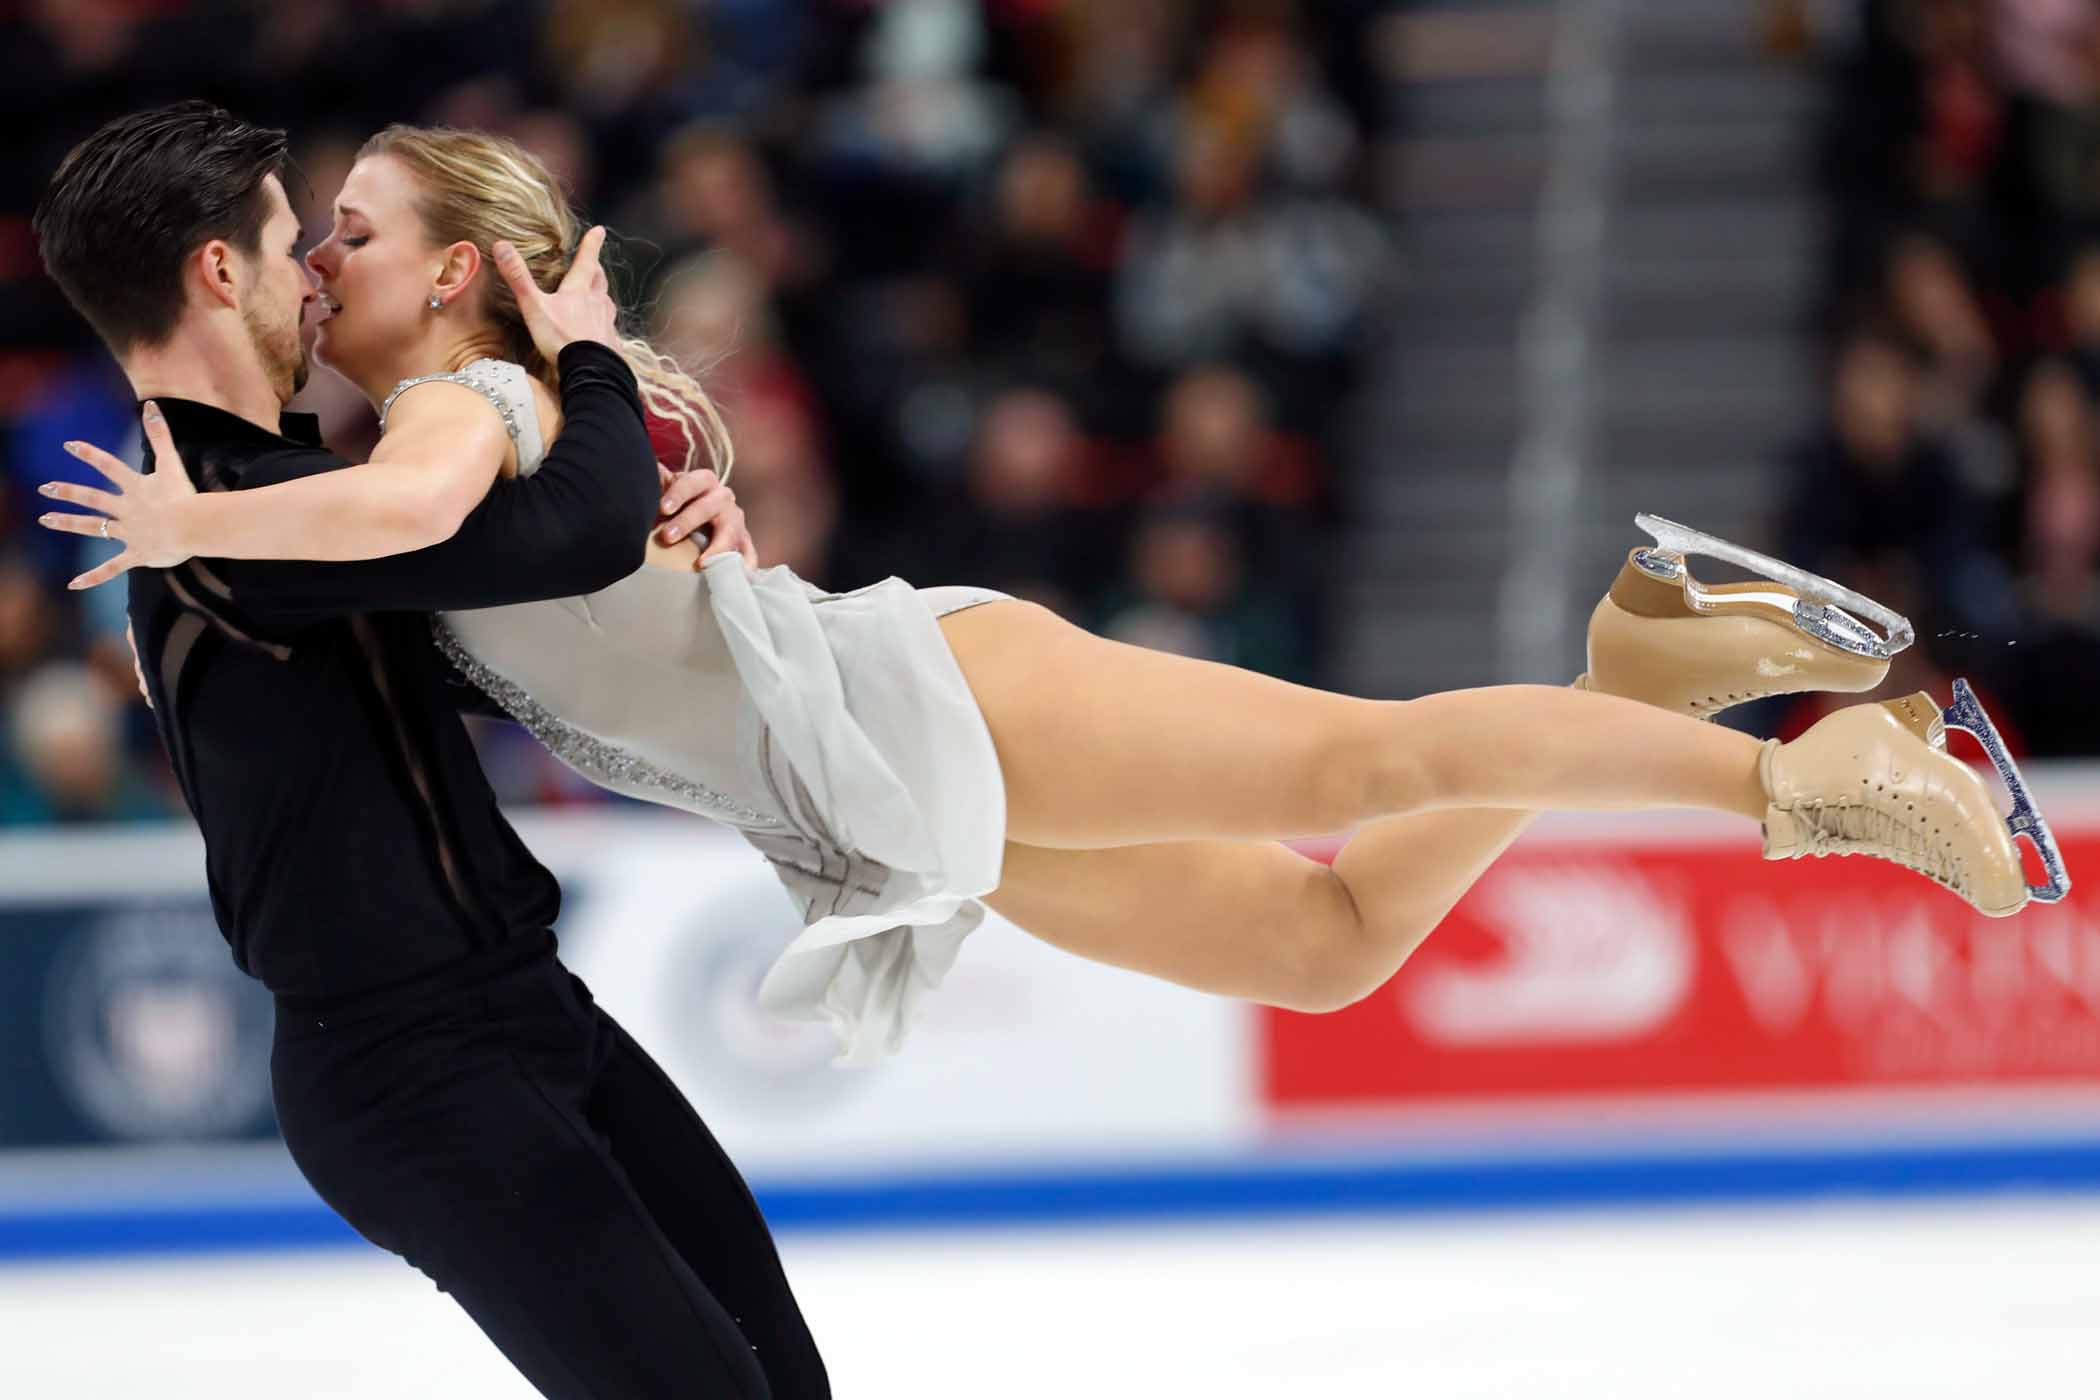 It’s Time! The US Figure Skating Championships Were This Weekend! Go